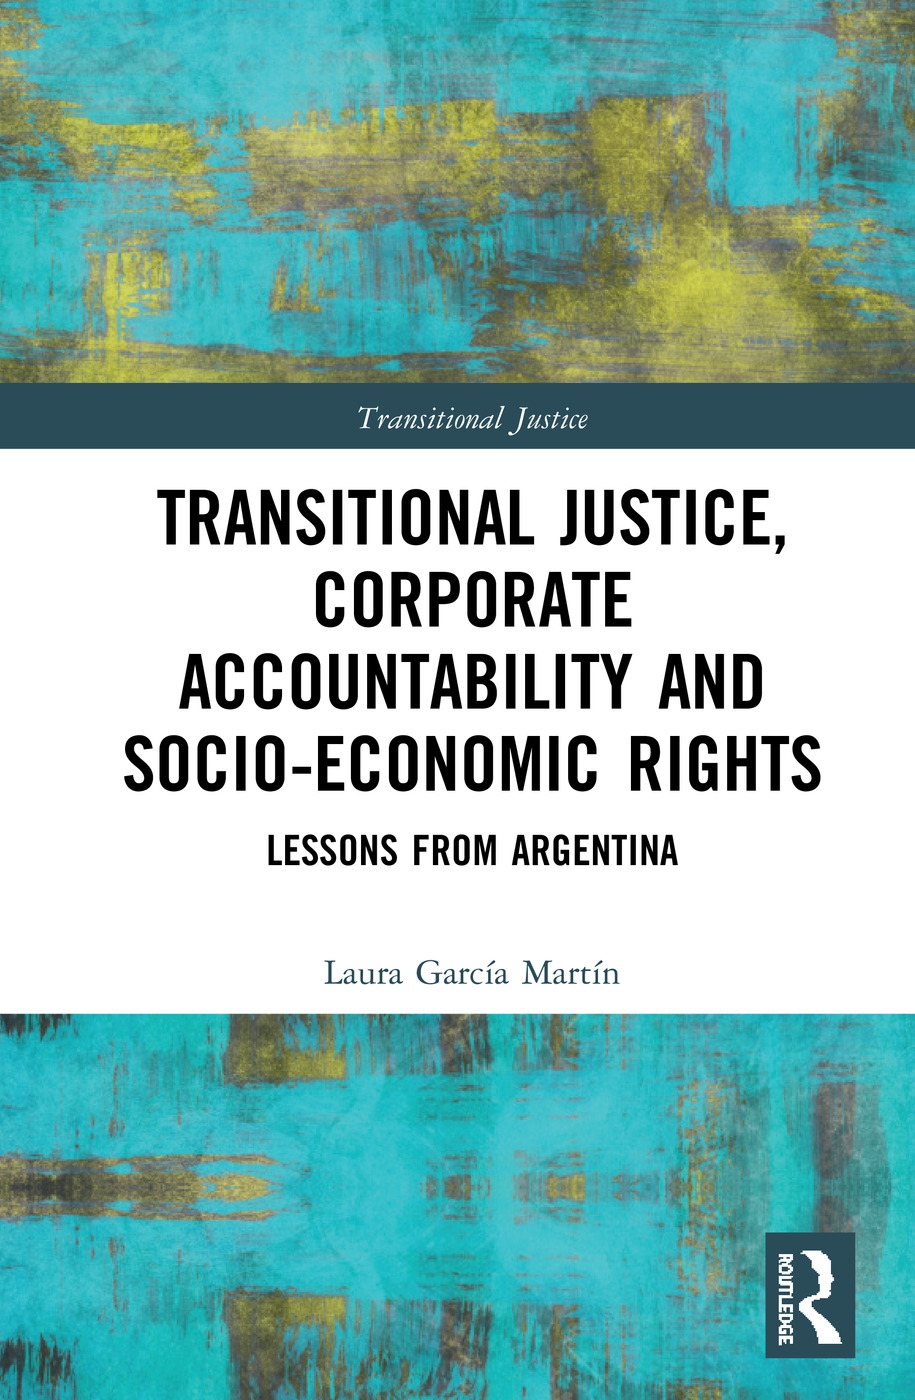 Transitional Justice, Corporate Accountability and Socio-Economic Rights: Lessons from Argentina